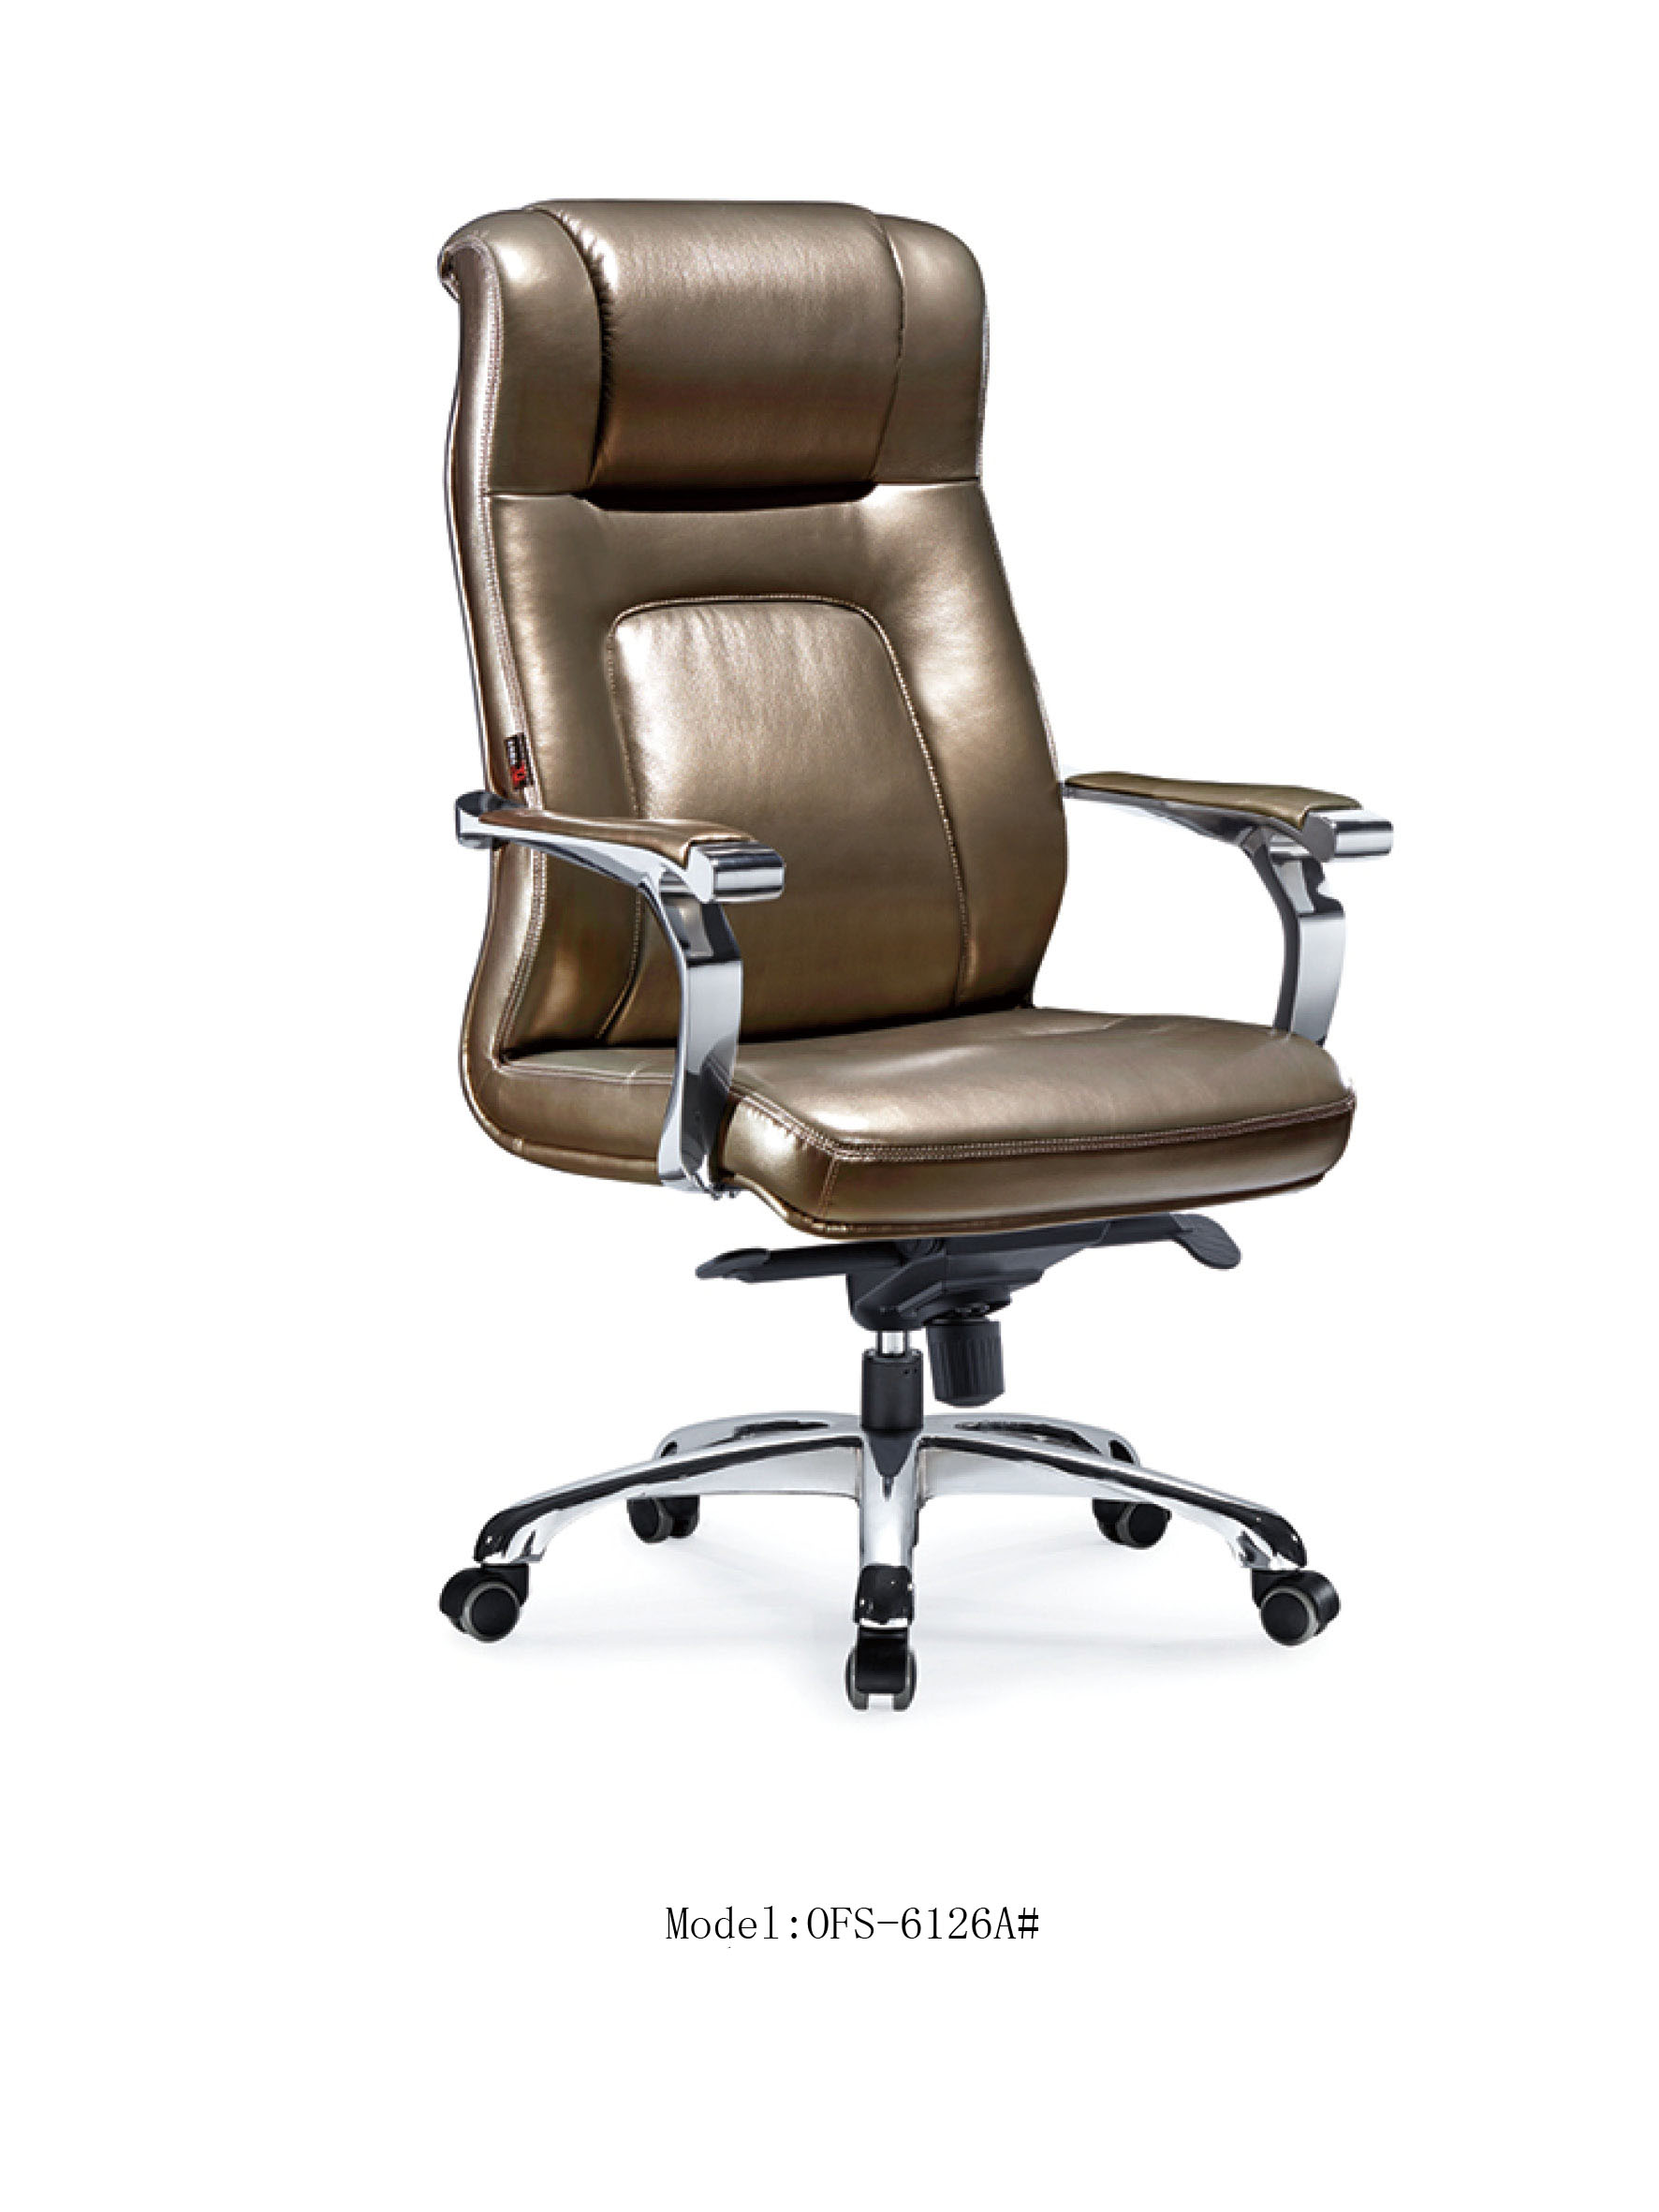 Hight Back Chair Leather Pu Chair Ofs 6126a Offisen Furniture